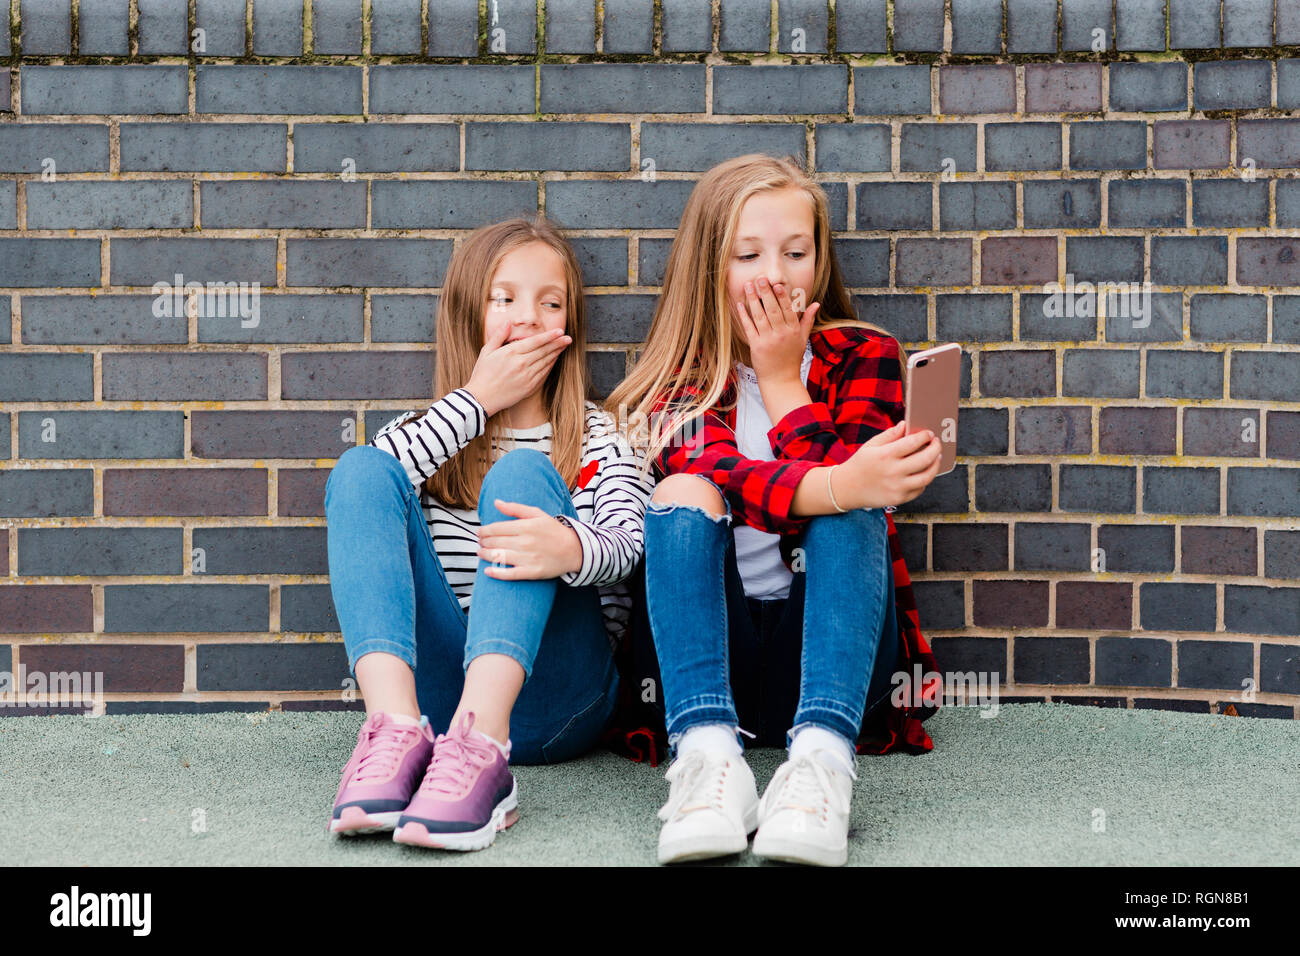 Portrait of two girls sitting in front of brick wall taking selfie with smartphone Stock Photo